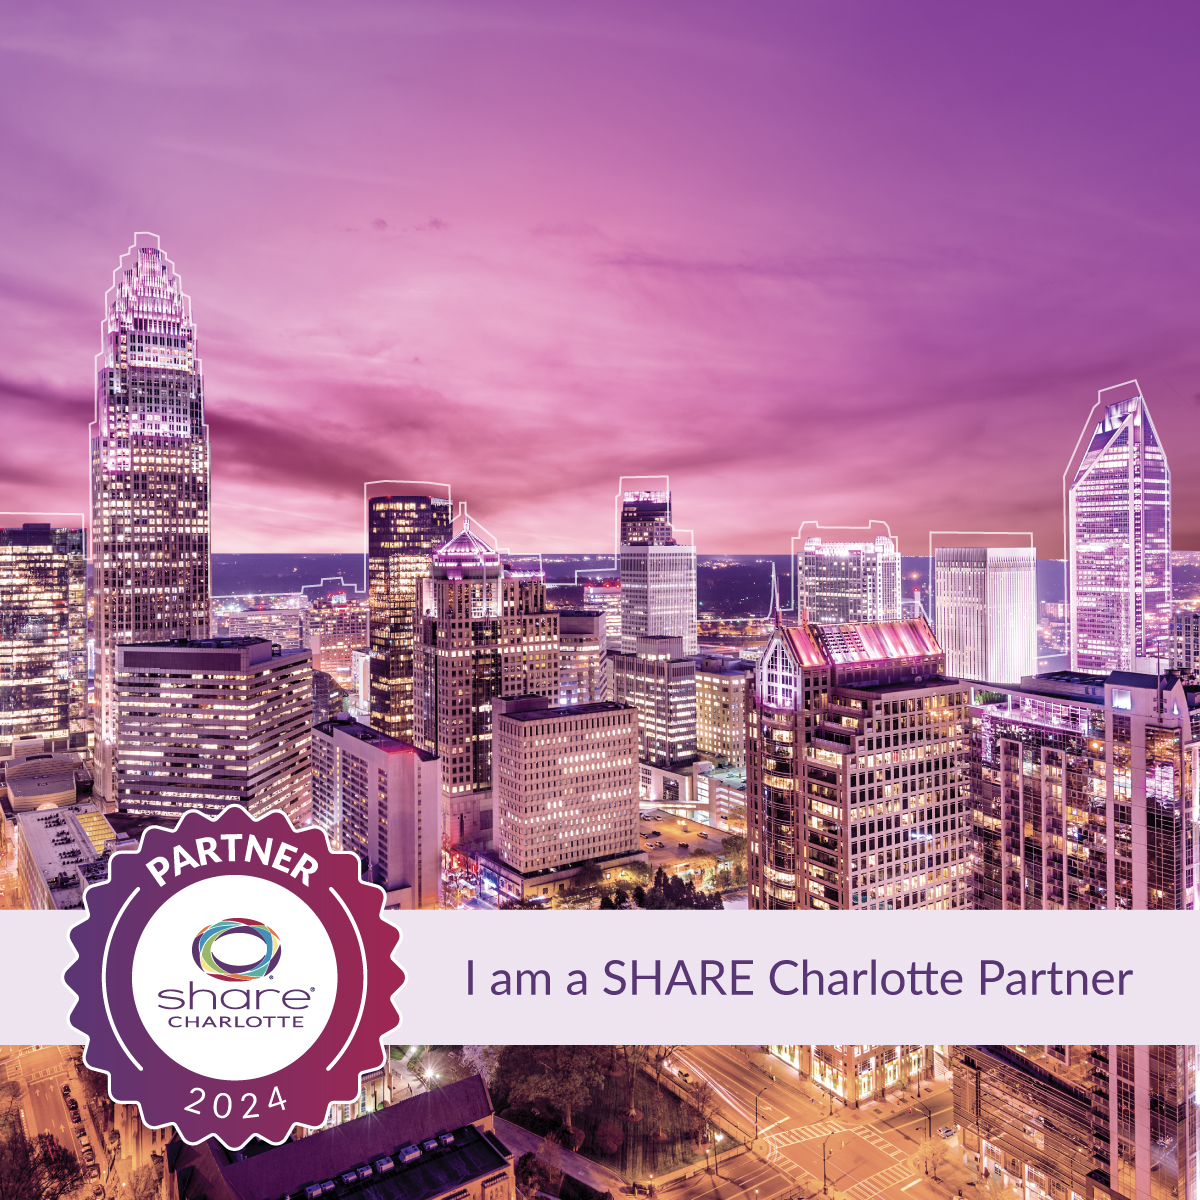 We all know it take a village! We are excited to call @SHARECLT a partner in our village 💜 Check out our Share profile at  sharecharlotte.org/nonprofit/thom…

#BetterTogether #Partnership #CommunitiesStrong